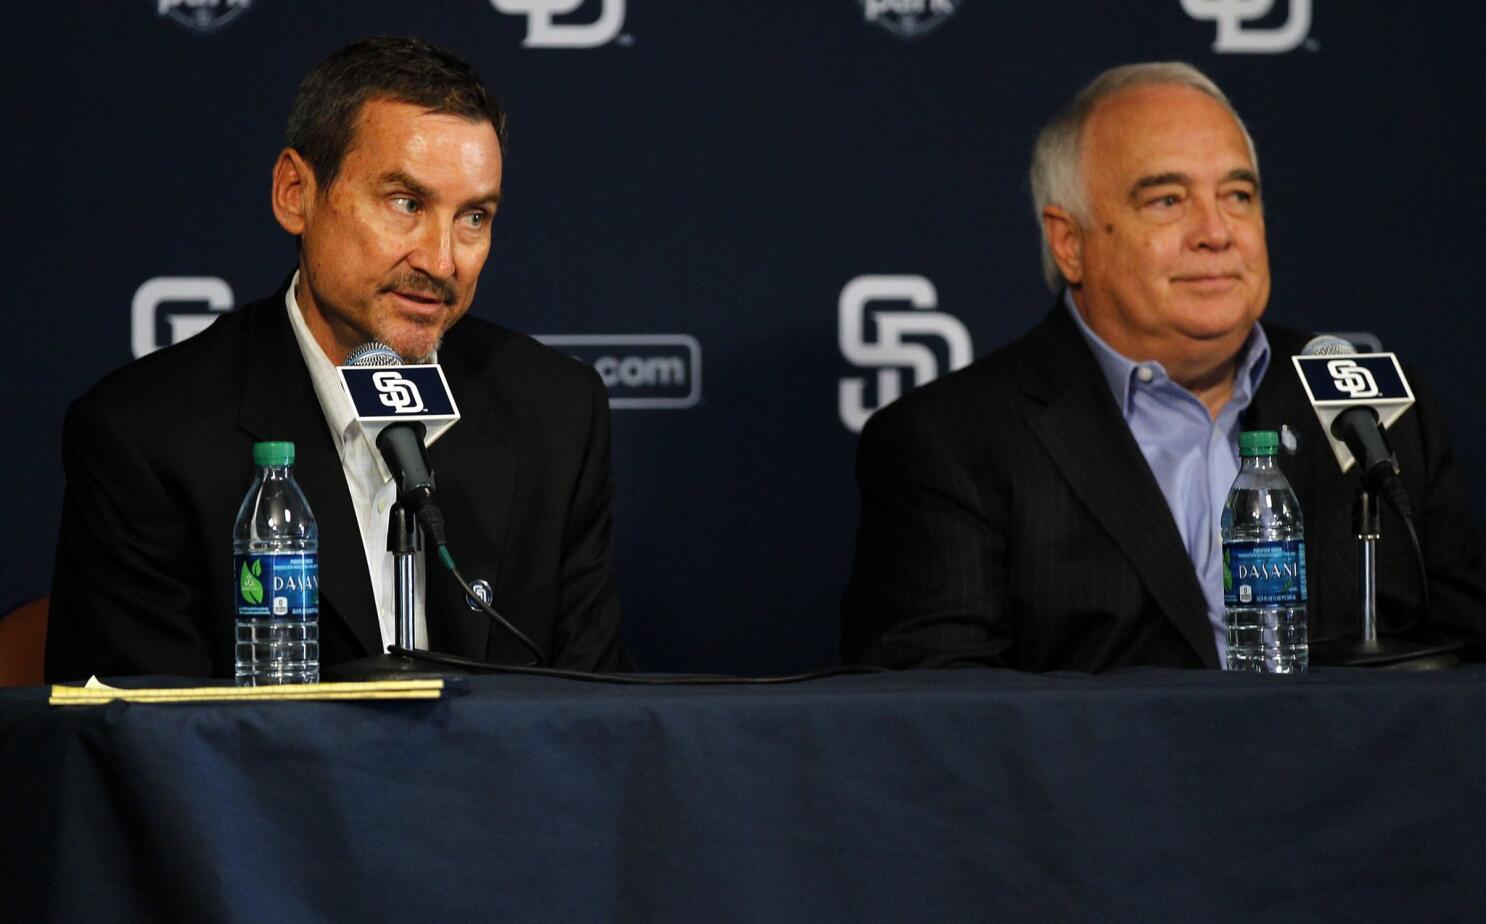 Seidler stands alone in year of Padres' awakening